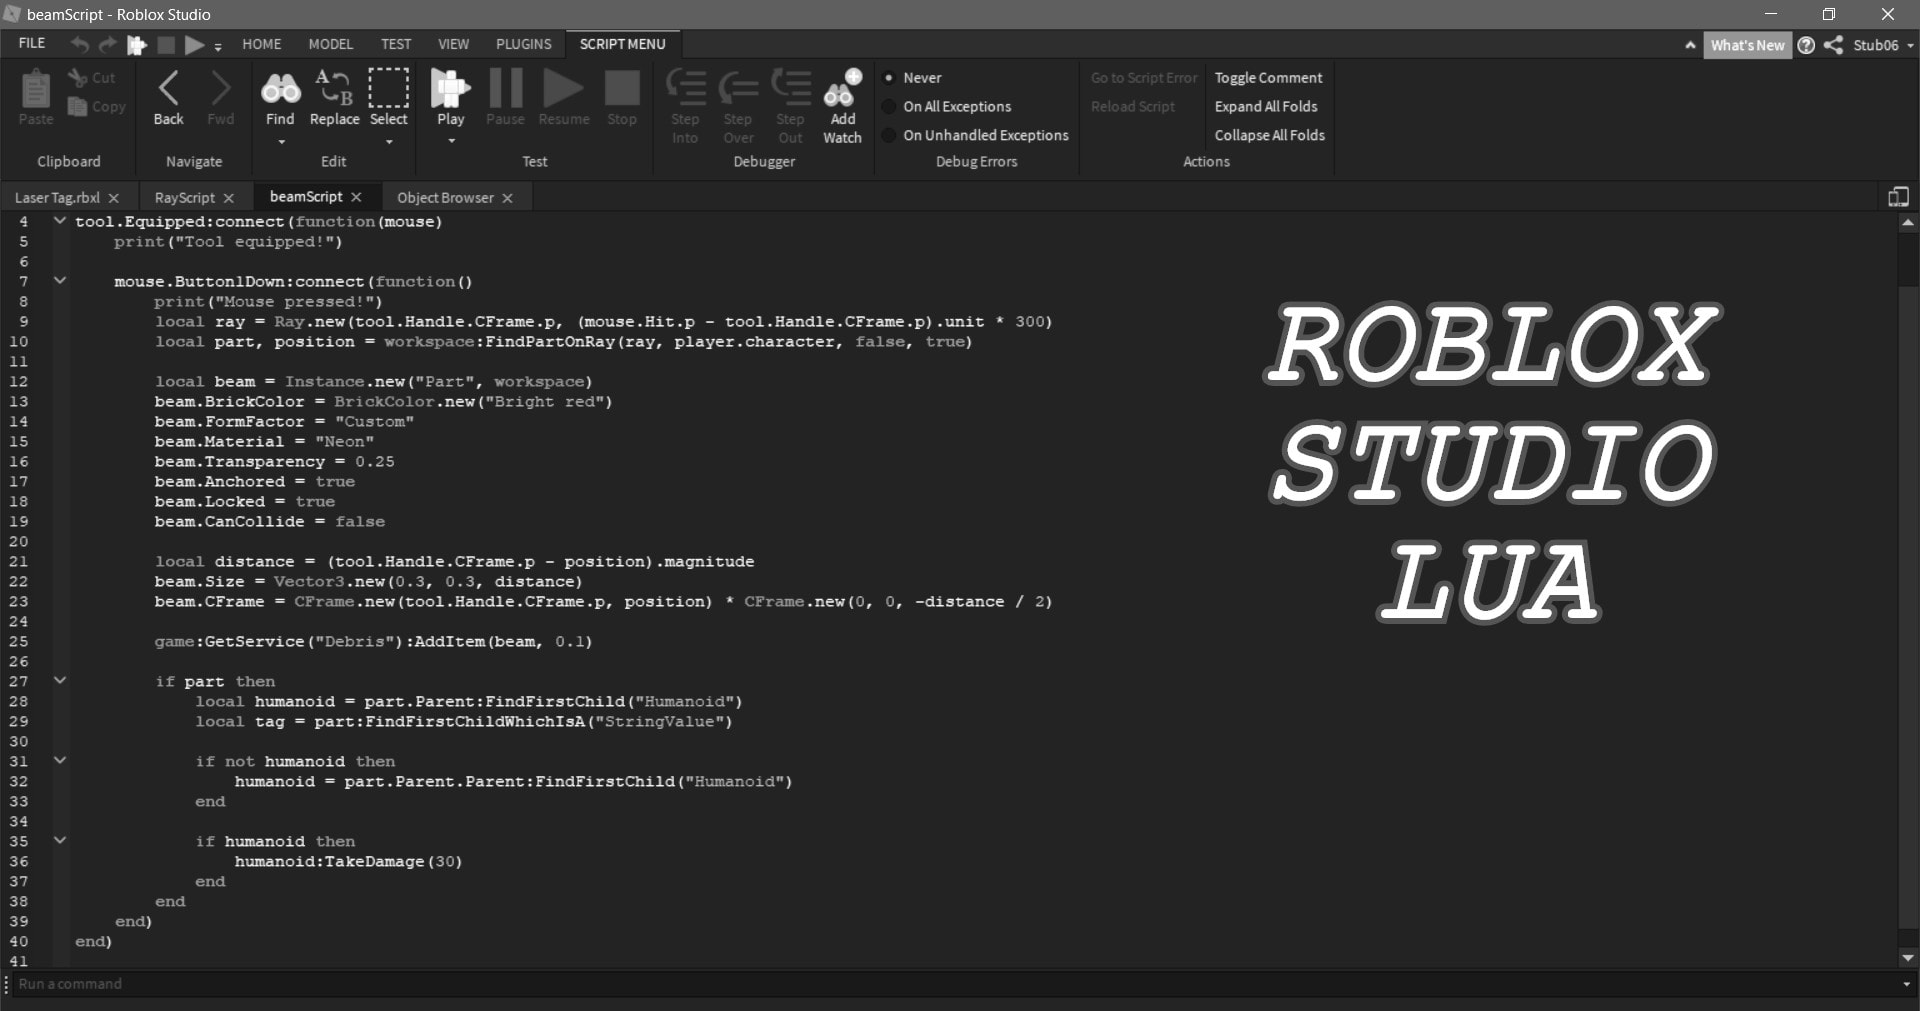 Code Cool Features And Such For You In Roblox Studio By Stub06 Fiverr - visual studio code roblox